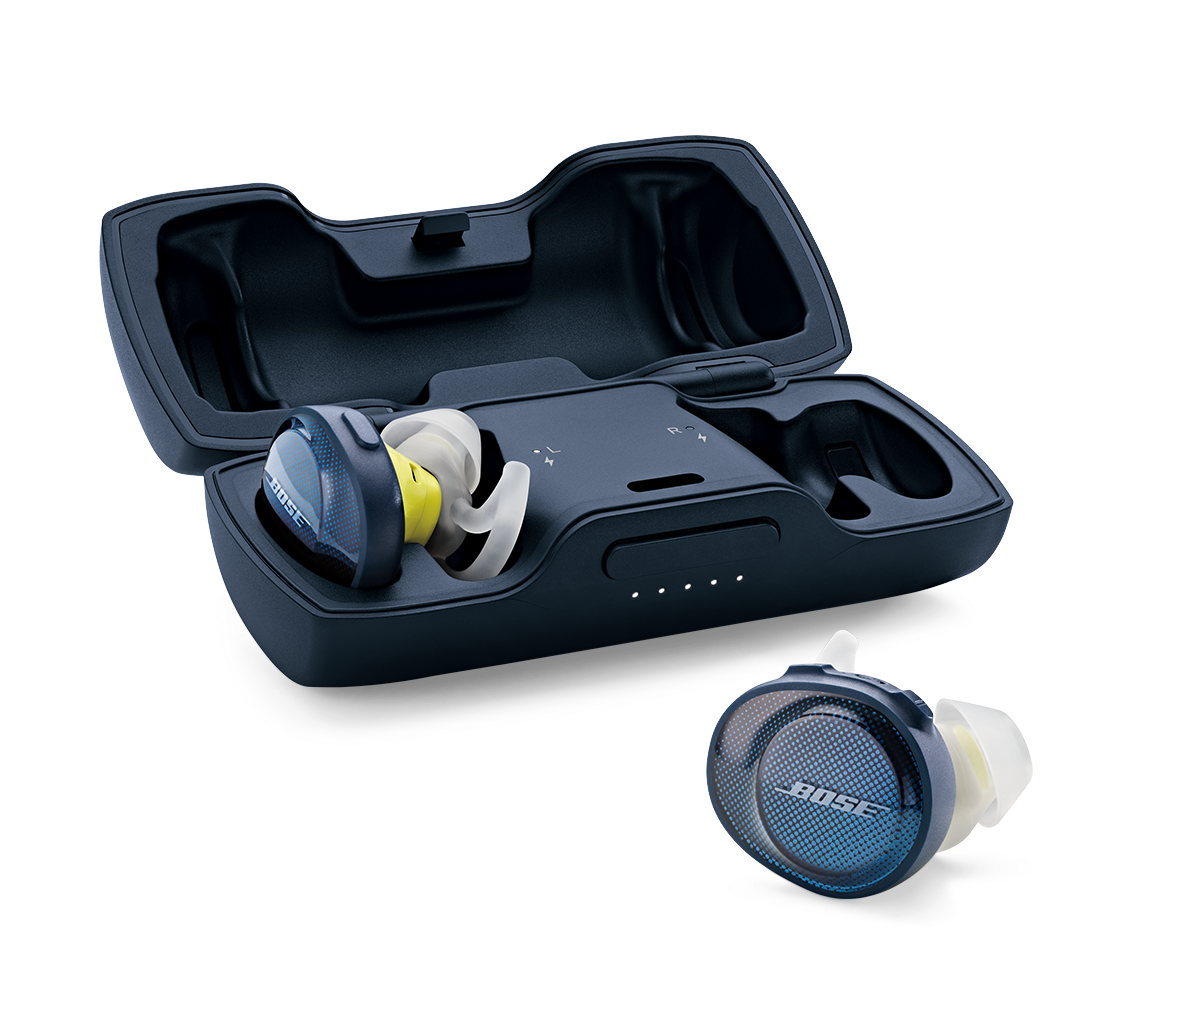 Bose SoundSport Bluetooth True Wireless Earbuds with Charging Case, Blue, SNDSPFREENVY - image 4 of 6